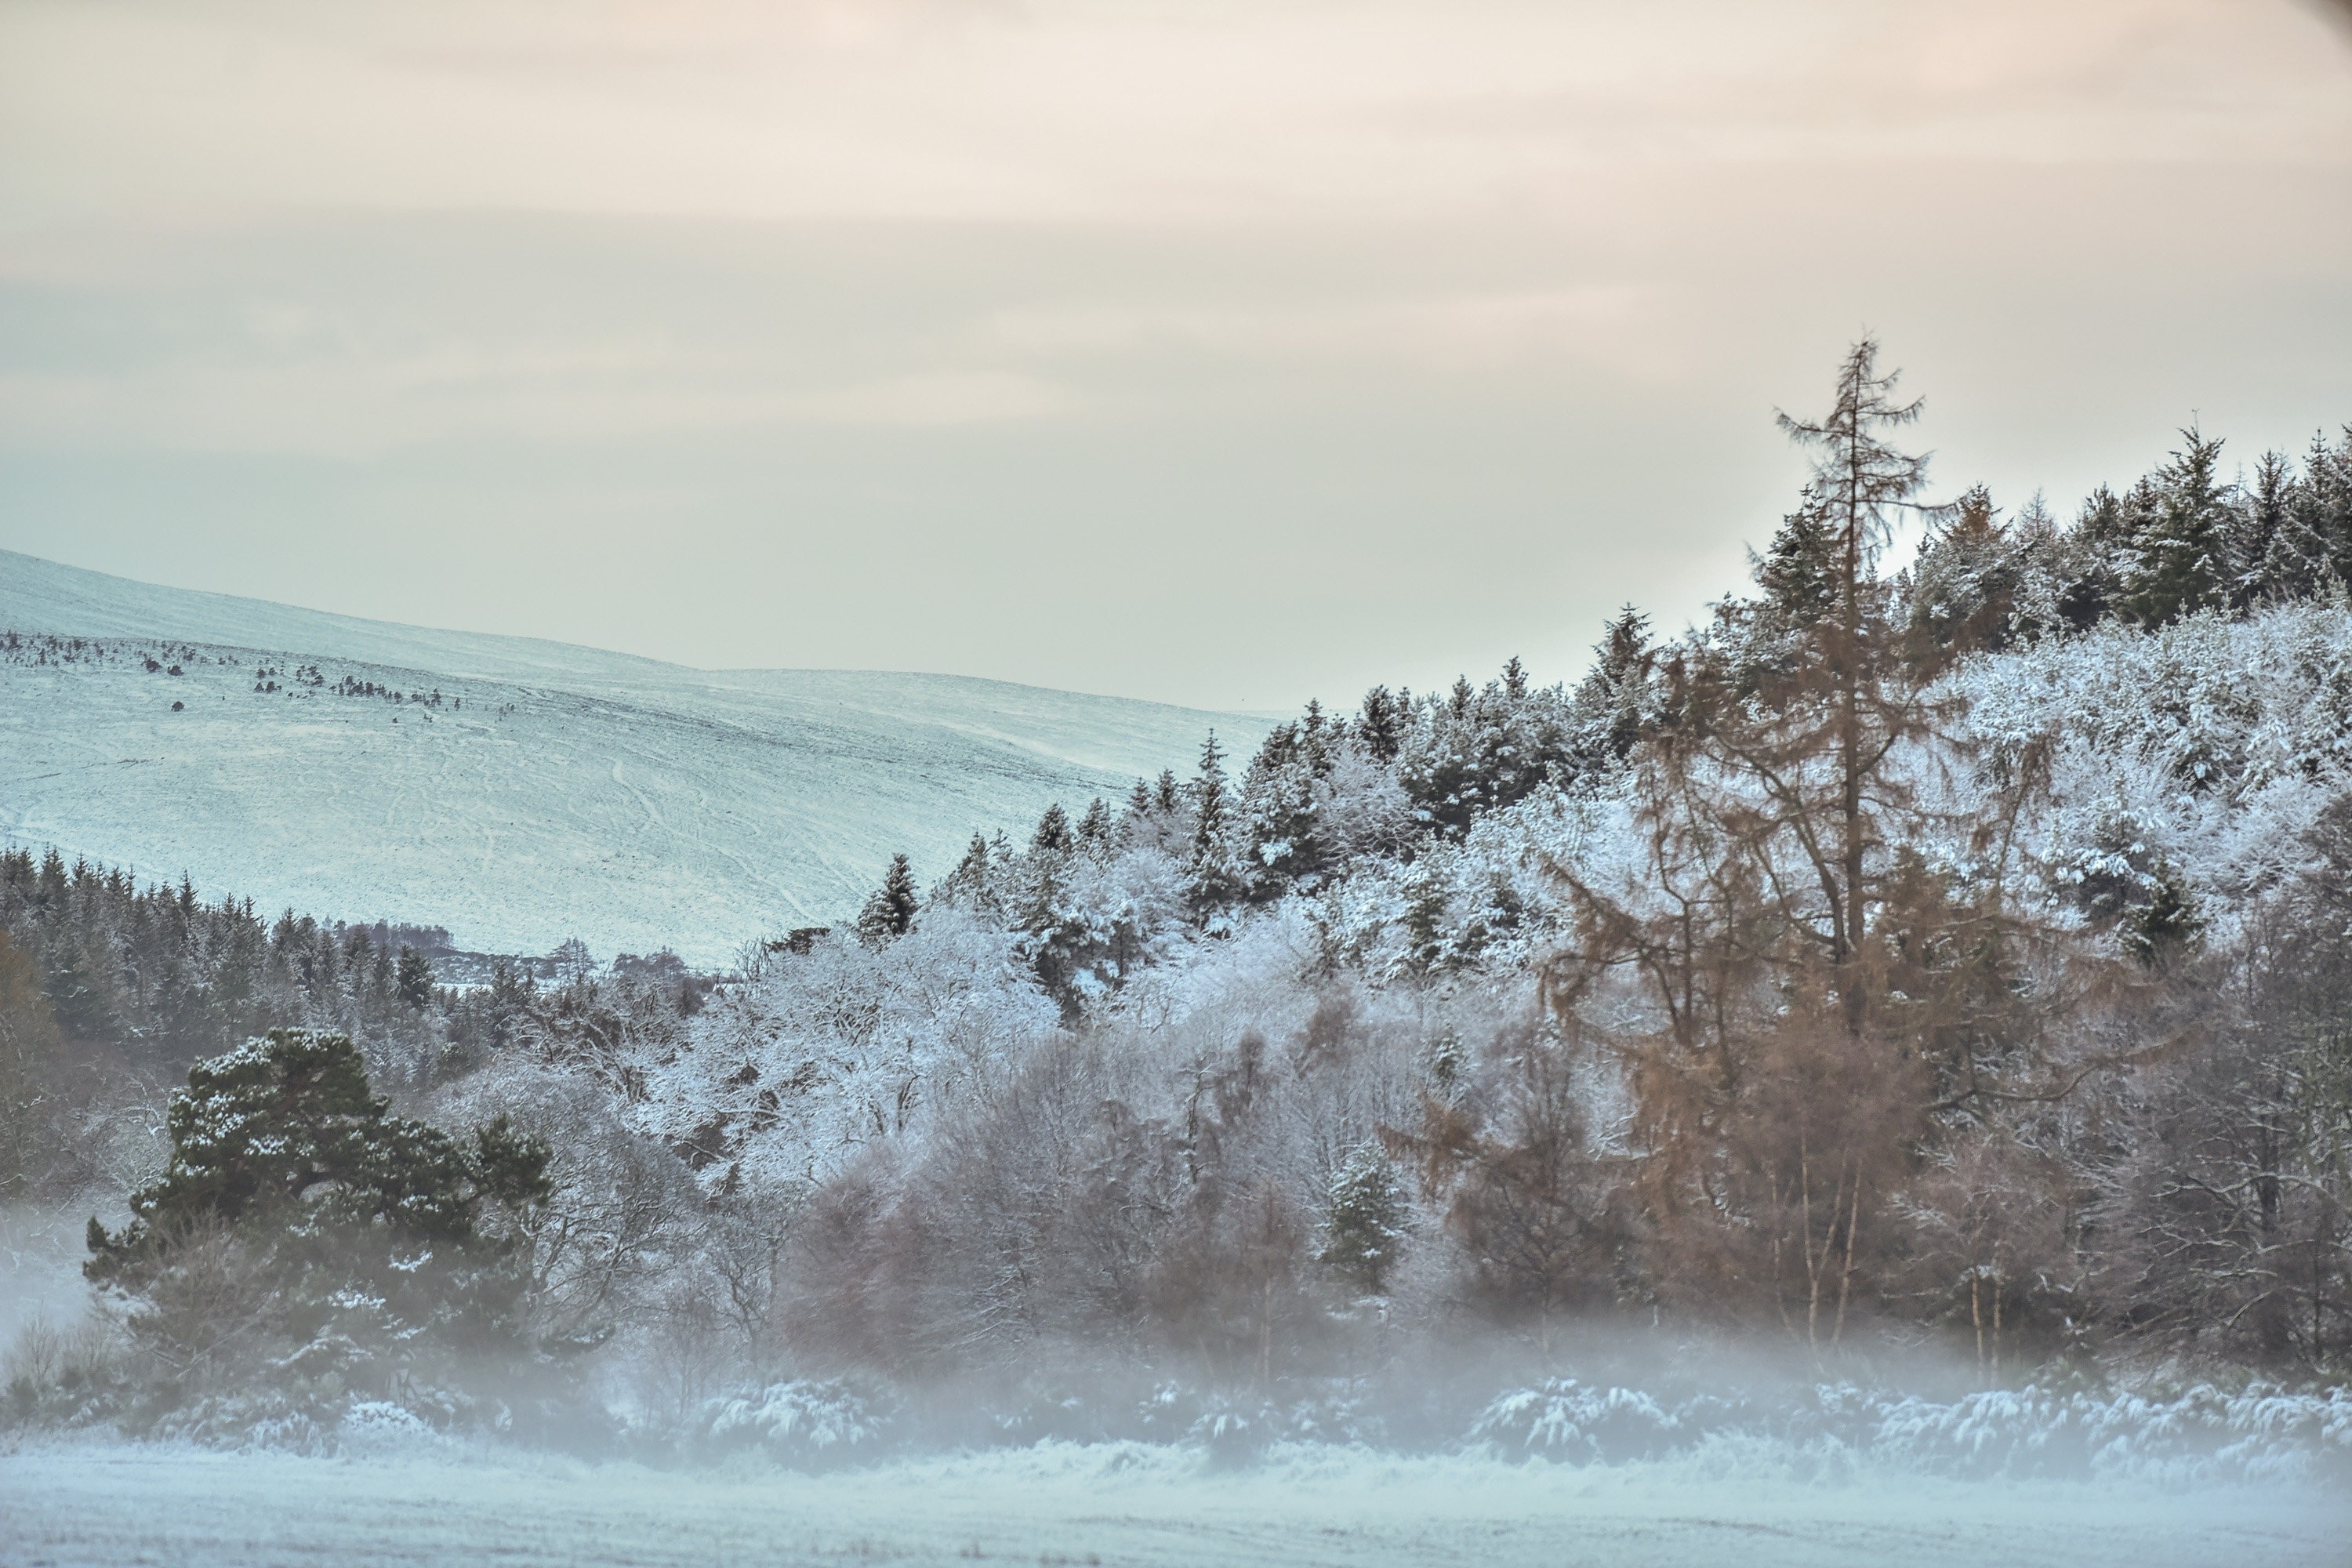 Morning mist rises from fields snow blanketed fields in Craigellachie, Moray on November 30 2015. Storm Clodagh has brought high winds and snow showers which covered the north of Scotland.